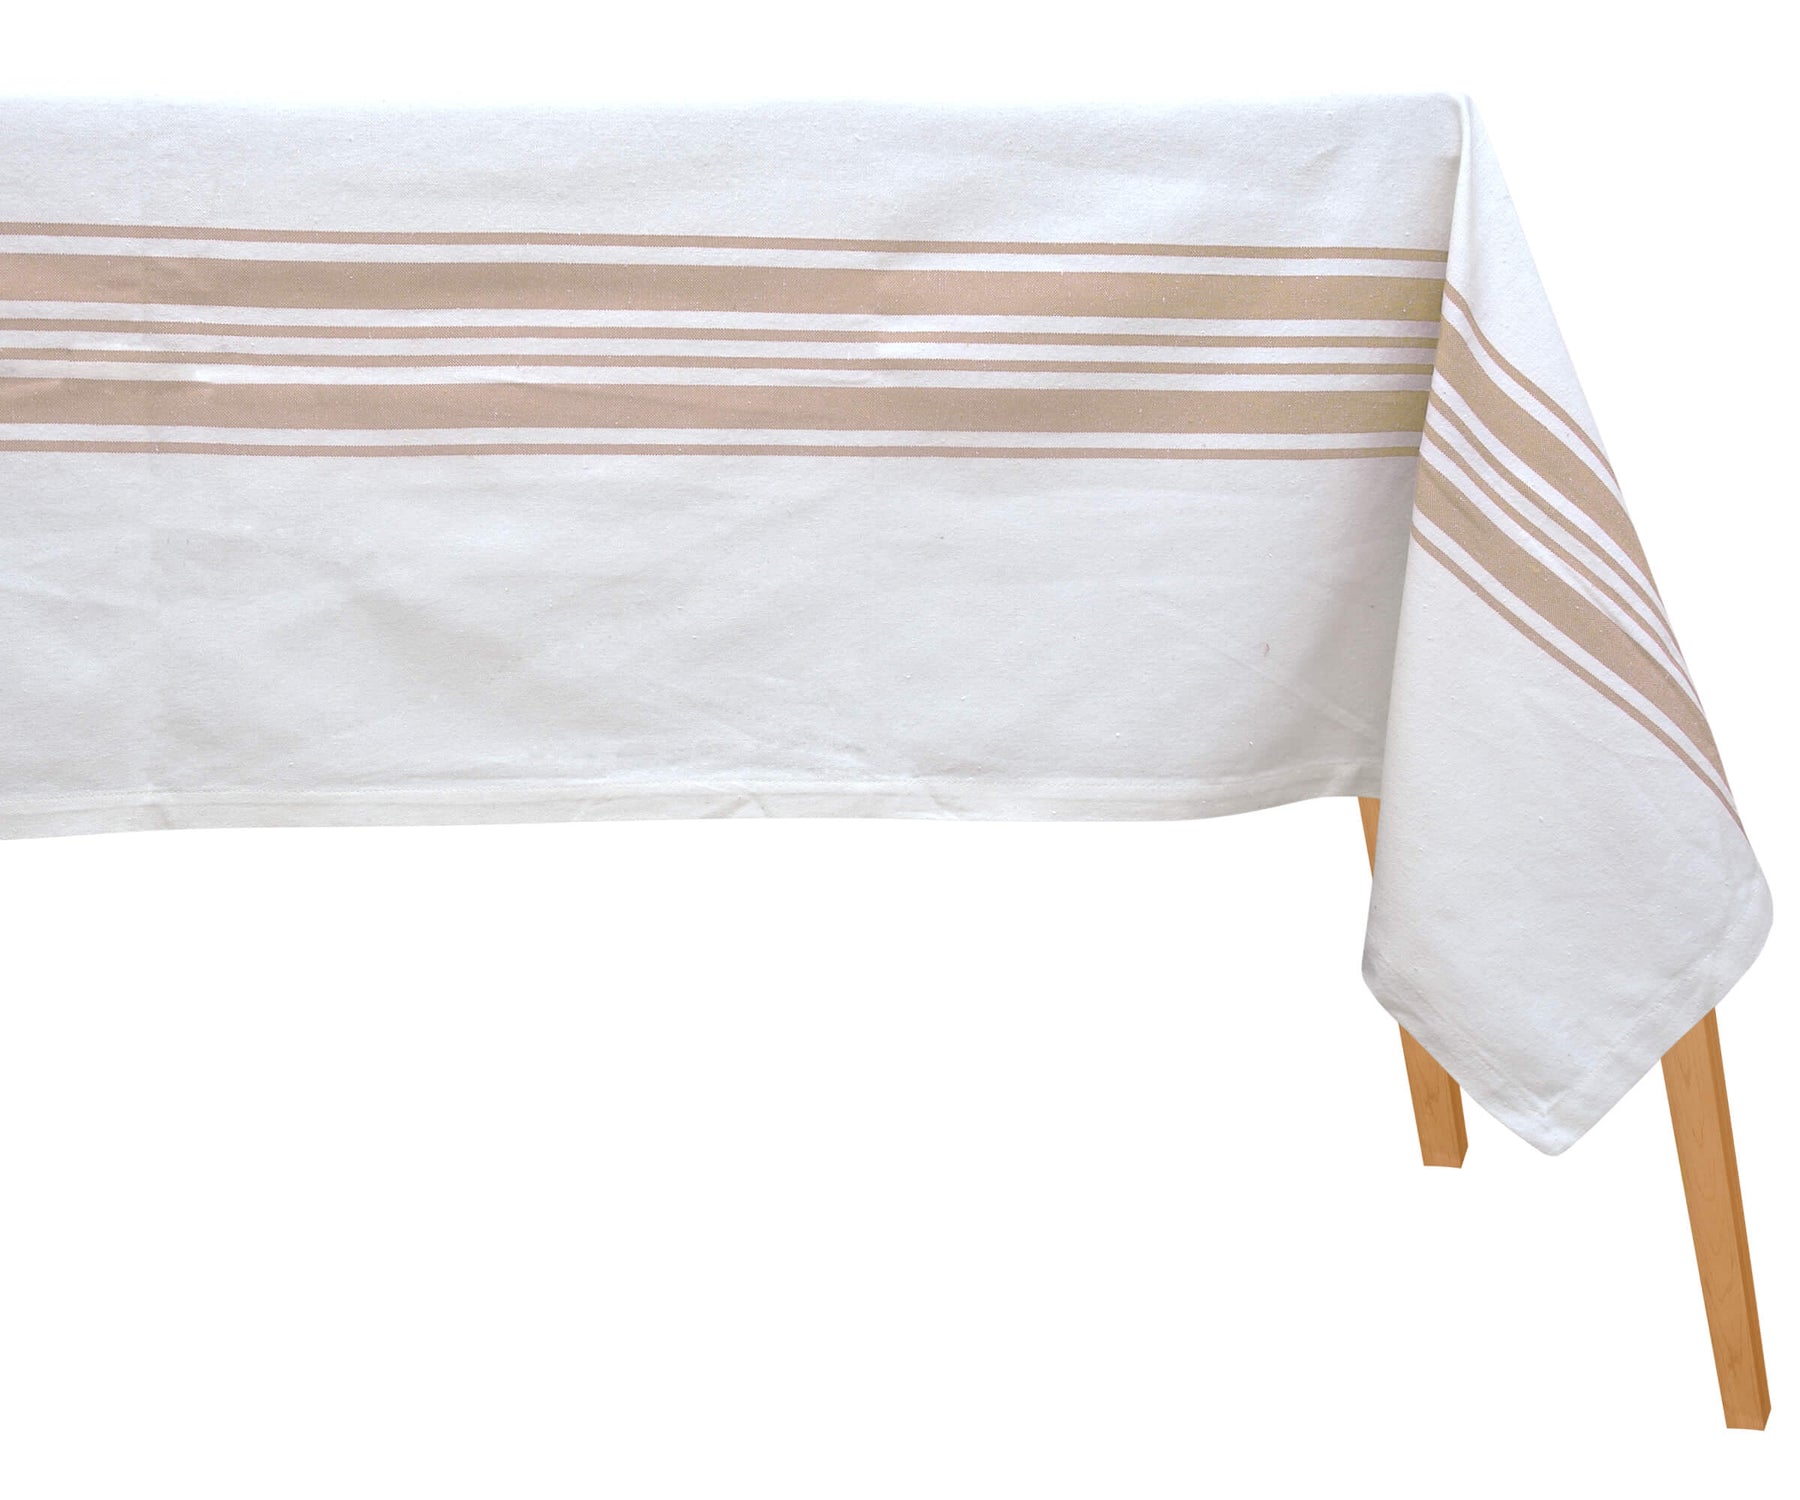 Farmhouse Tablecloth on a table with a central brown stripe design